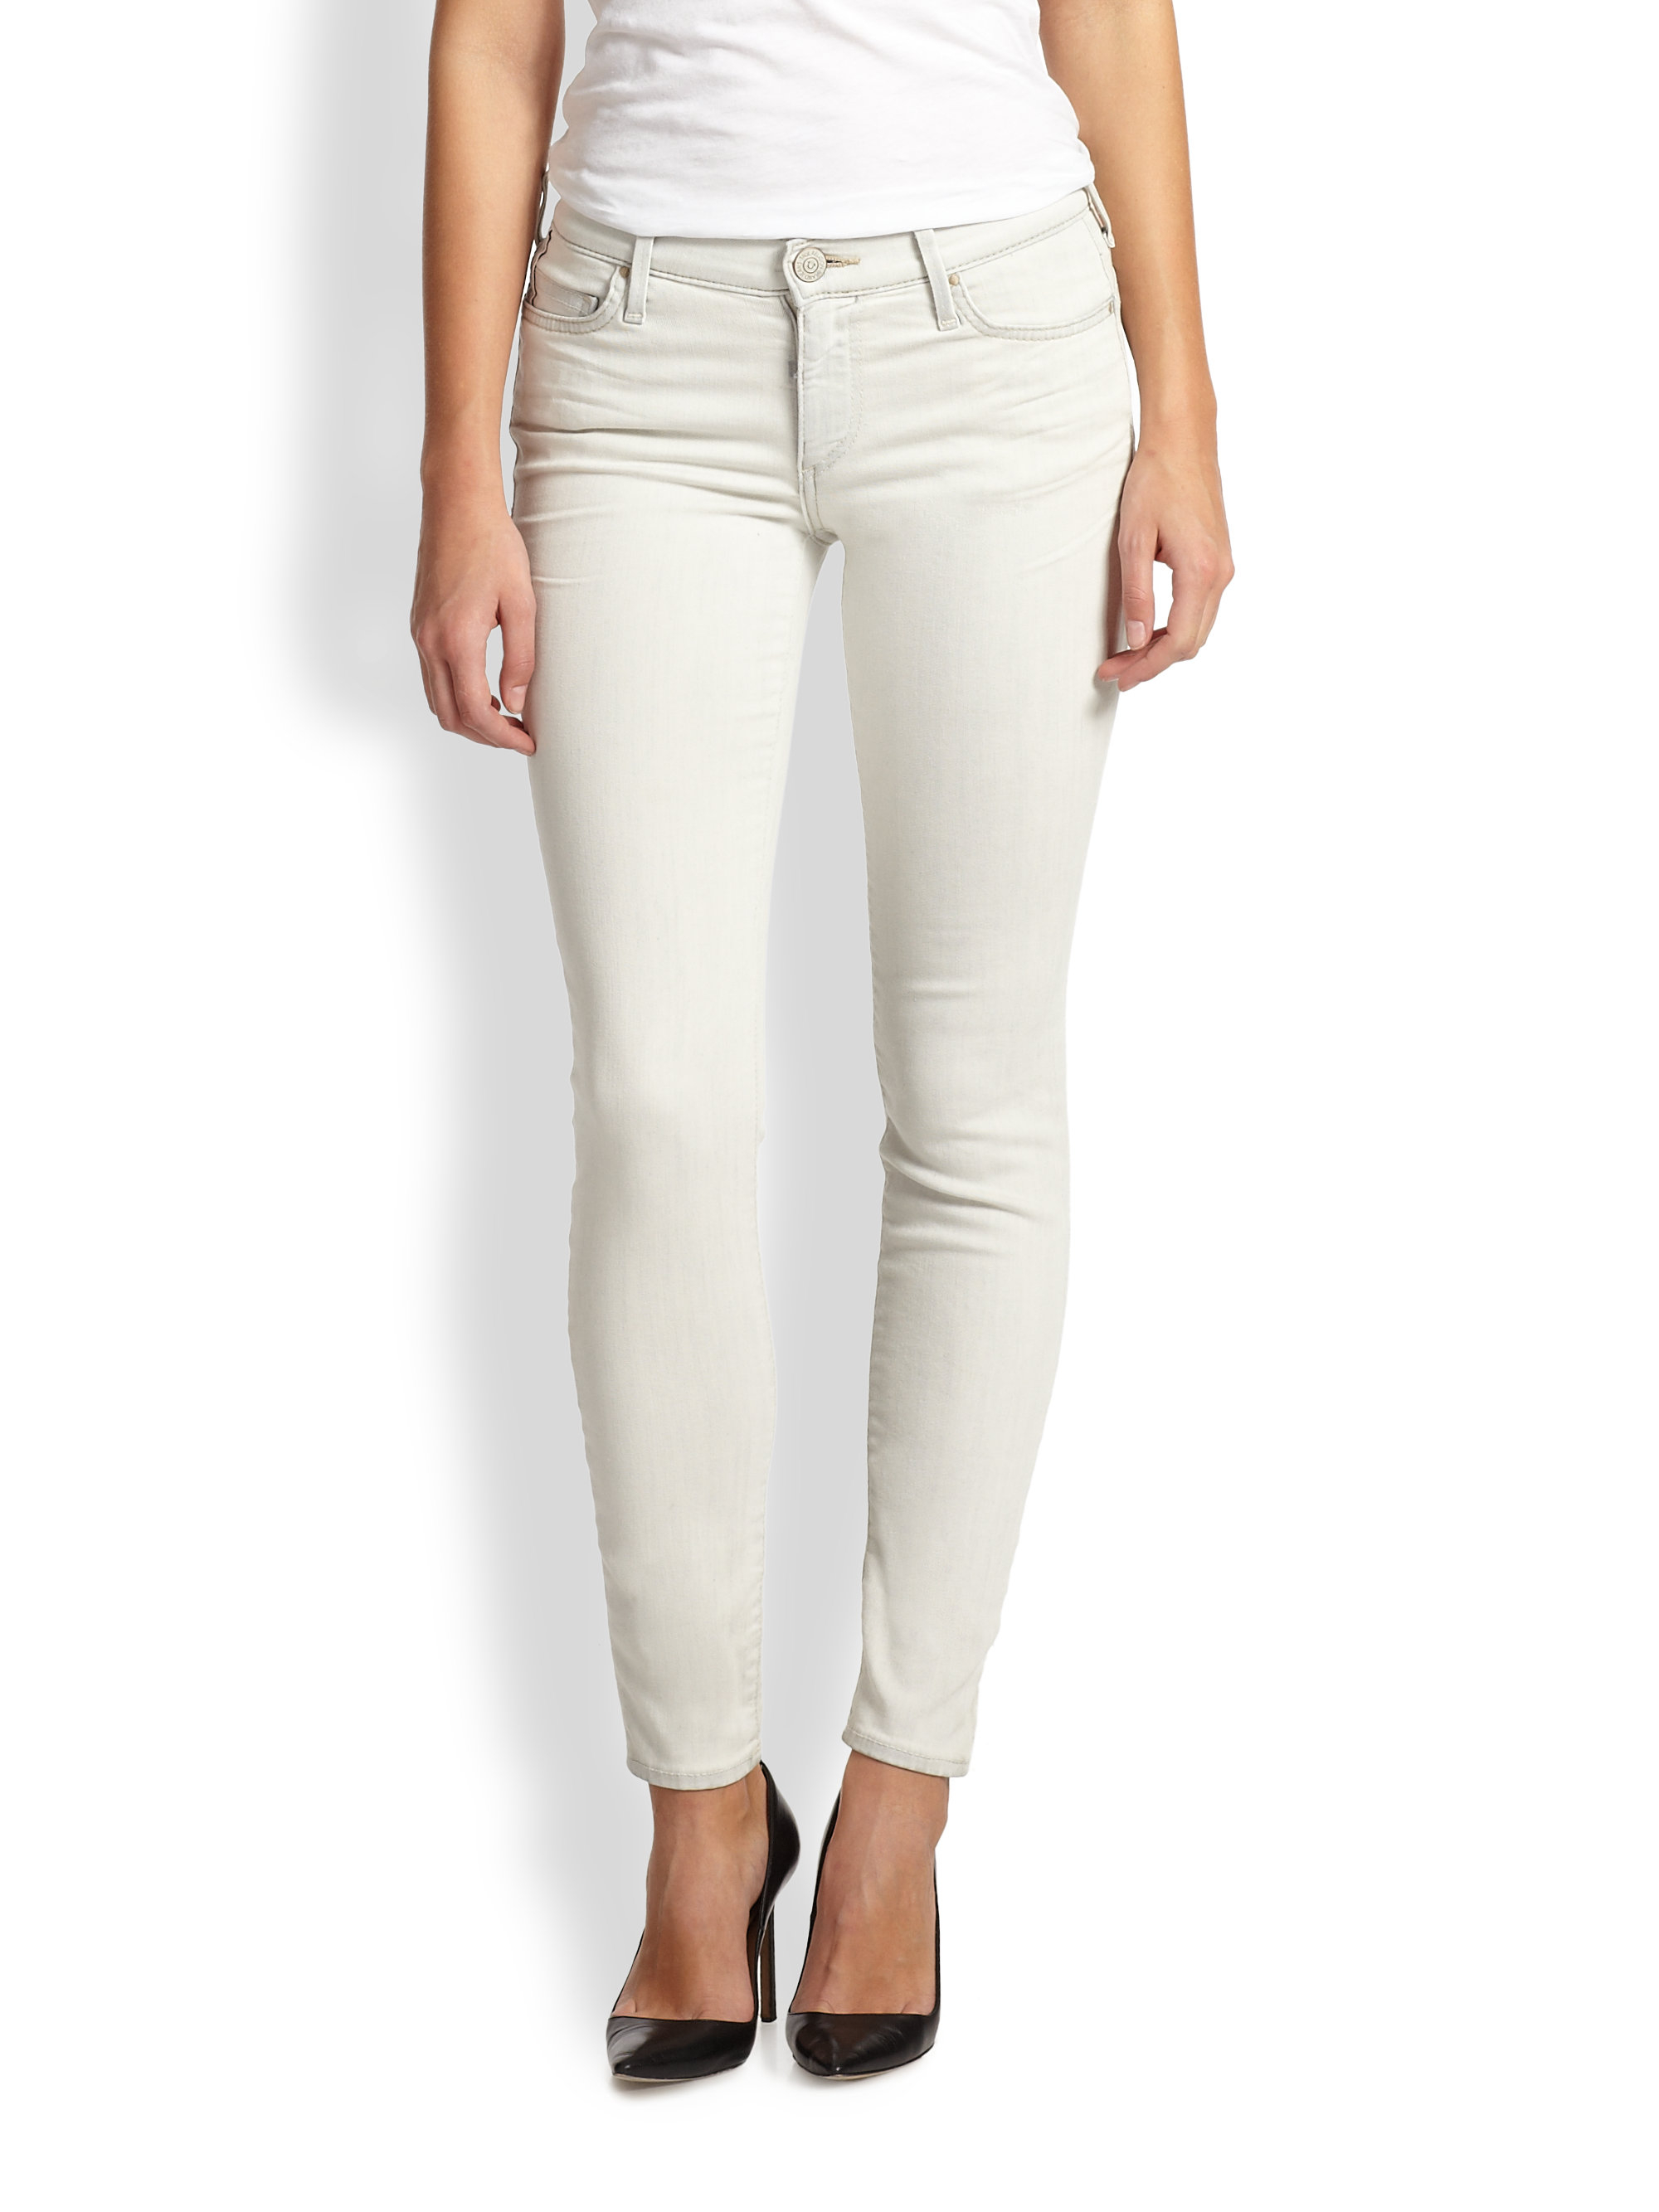 Lyst - True religion Victoria Skinny Ankle Jeans in Natural